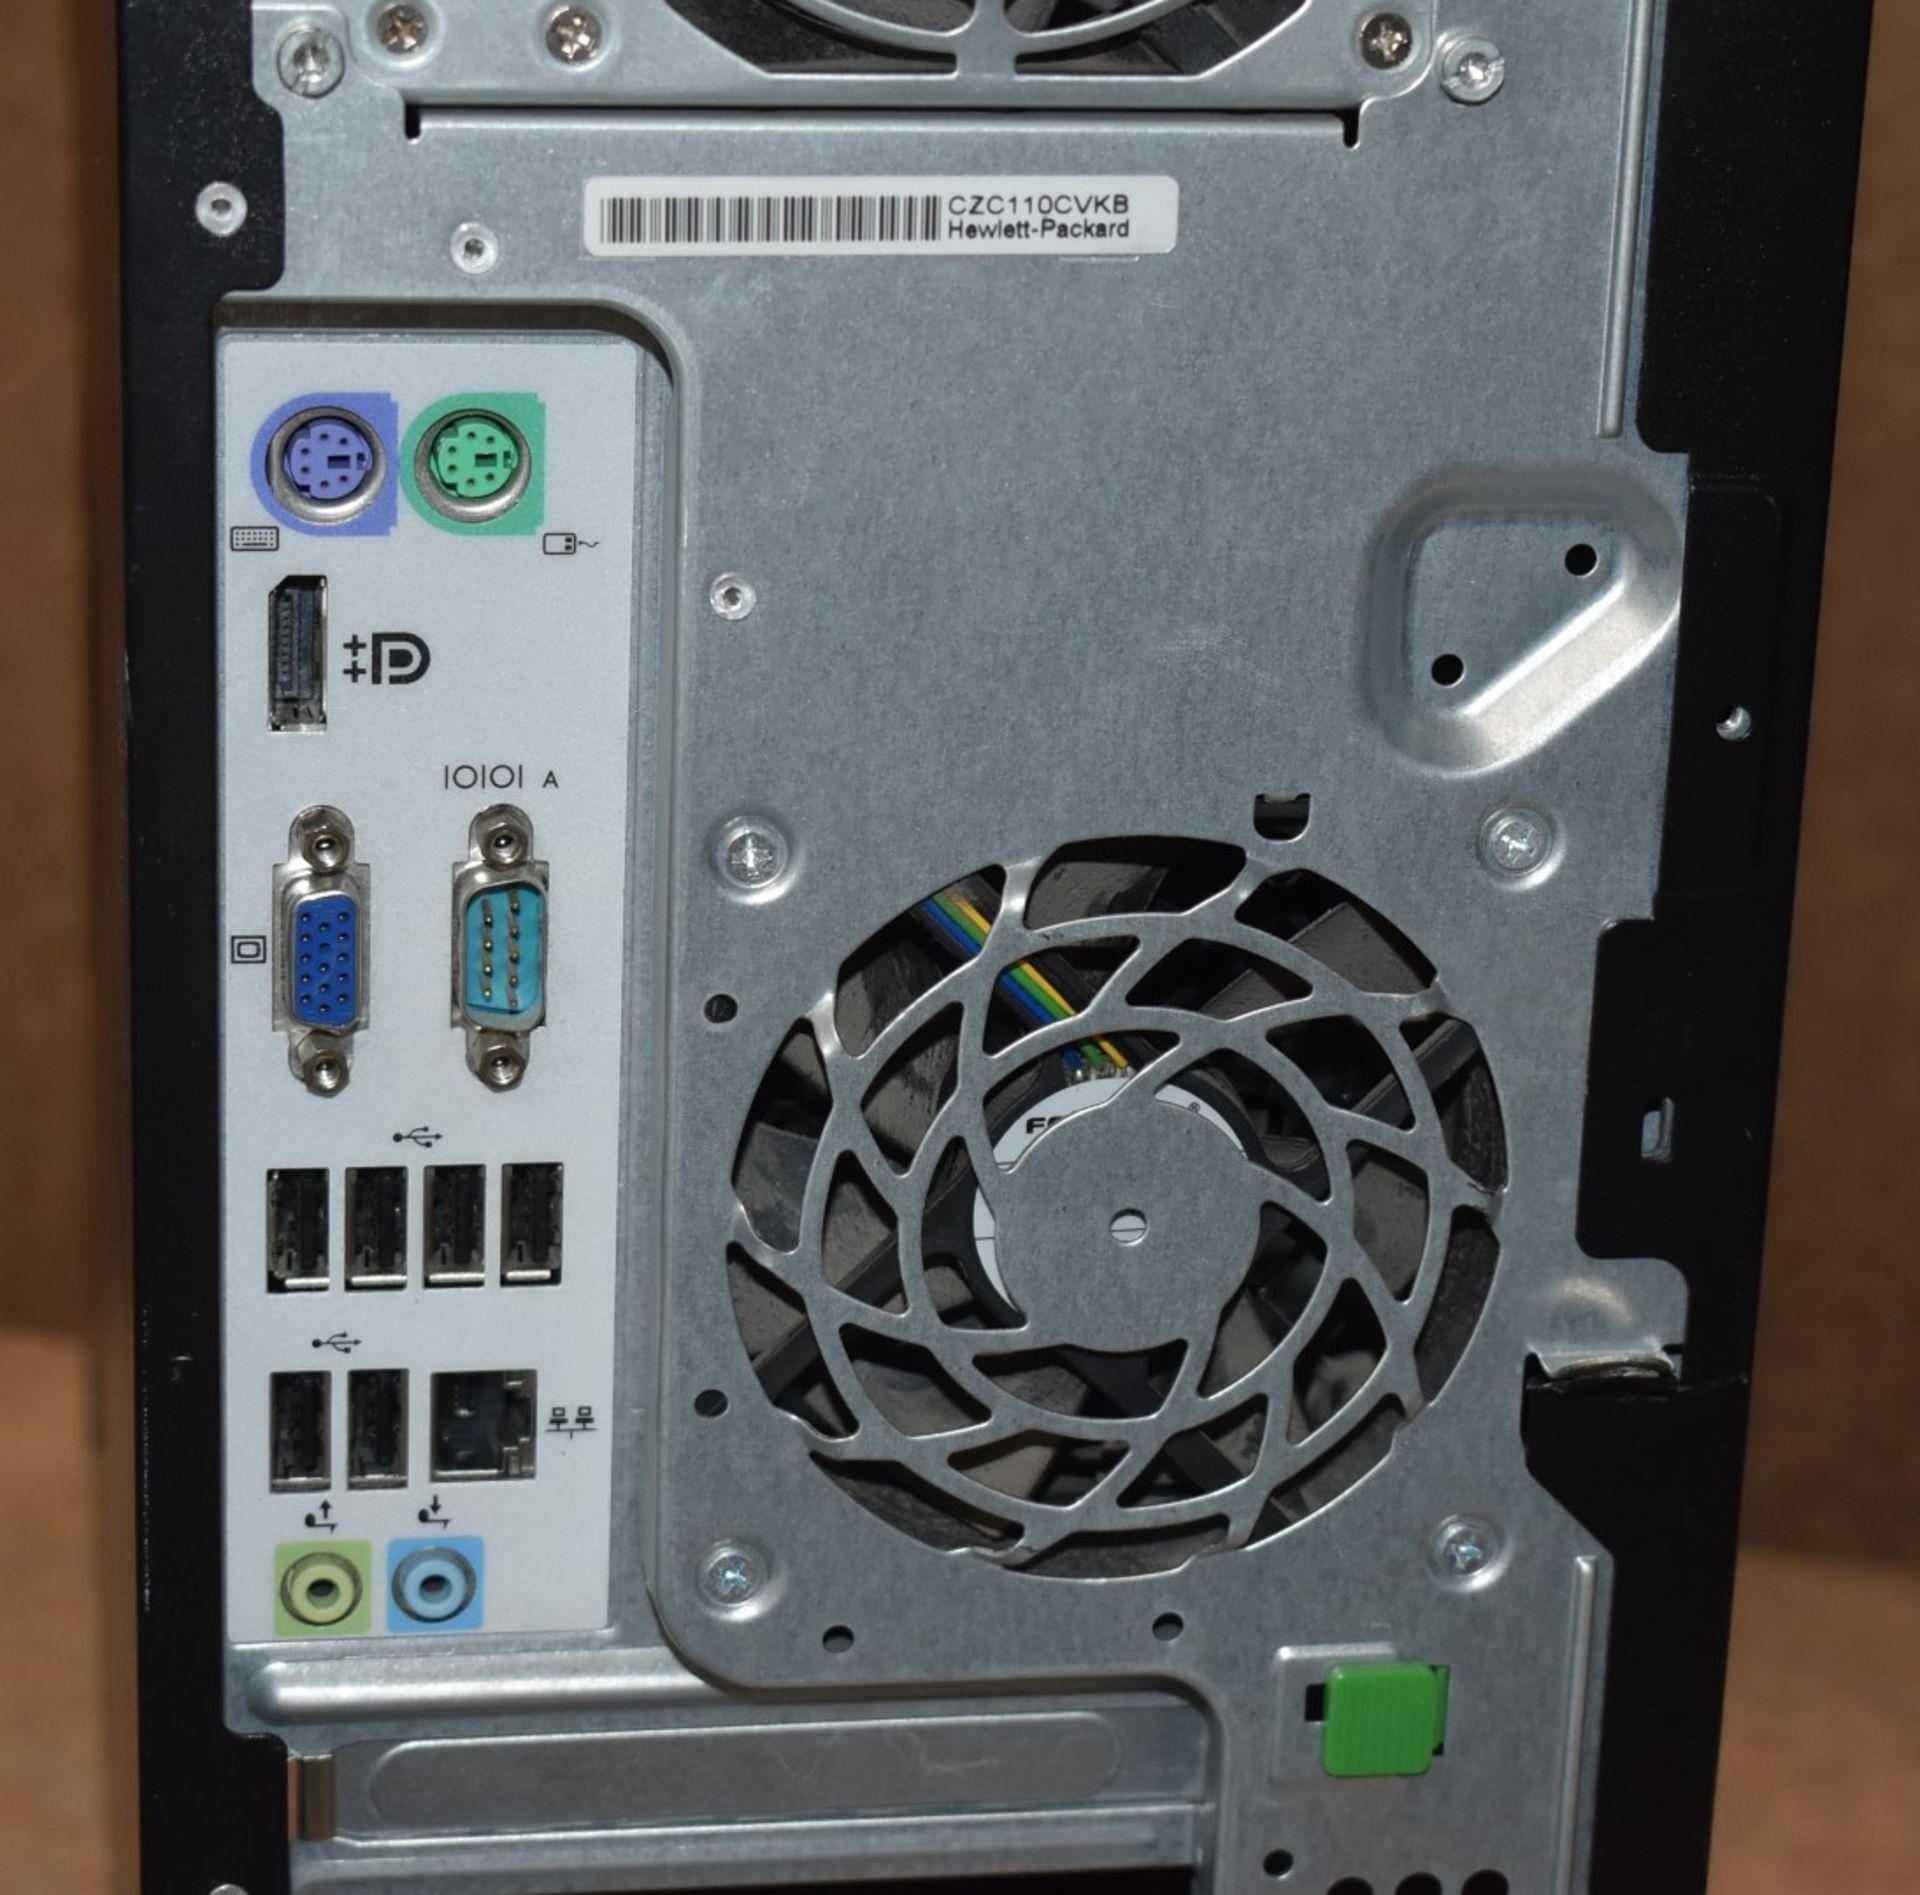 1 x HP Compaq 8100 Elite Mini Tower Desktop PC - Features an Intel i7 Processor and 4gb Ram - Spares - Image 5 of 5